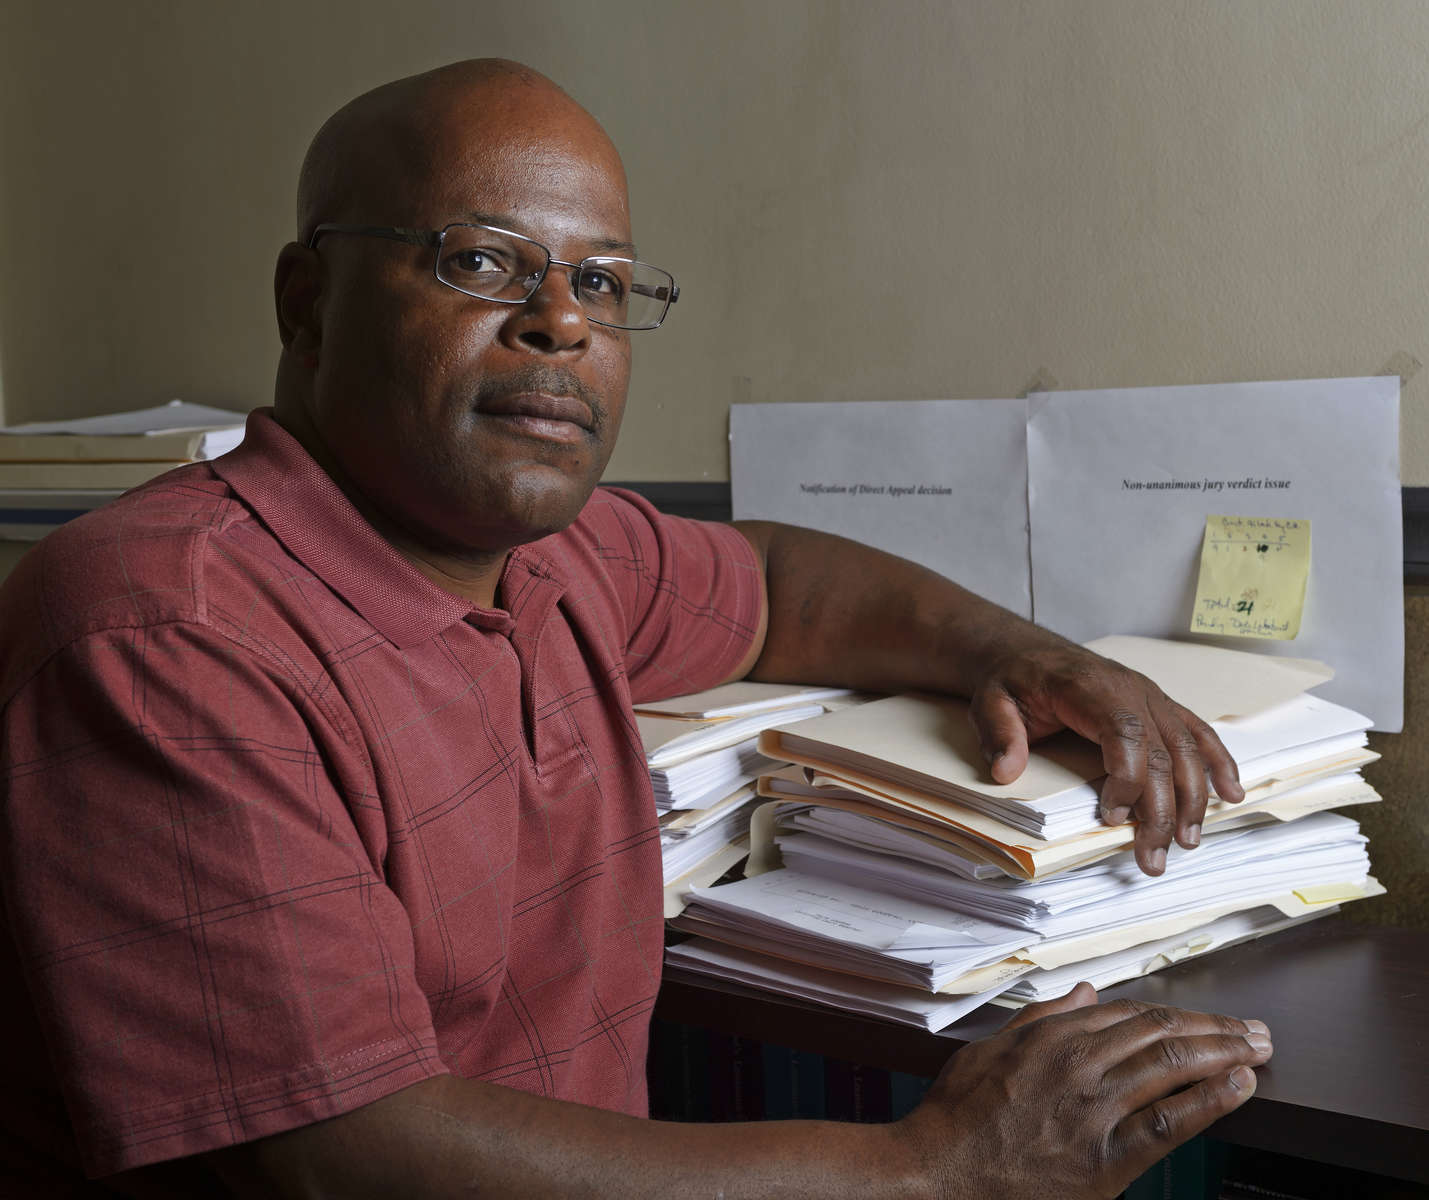 Portraits included in non-unanimous jury project that was awarded the 2019 Pulitzer Prize for Local Reporting. Calvin Duncan poses for a photo with two stacks of legal paperwork filed under {quote}Notification of Direct Appeal Decision{quote} and Non-unanimous Jury Verdict issues{quote} in his Central Business District office in New Orleans, La., Friday, Feb. 23, 2018. Duncan is a former Angola inmate who is pushing the United States Supreme Court, through repeated petitions on behalf of inmates convicted on non-unanimous jury counts, to overturn the state's unusual law allowing murder convictions of a 10 to 2 jury serious felony cases.